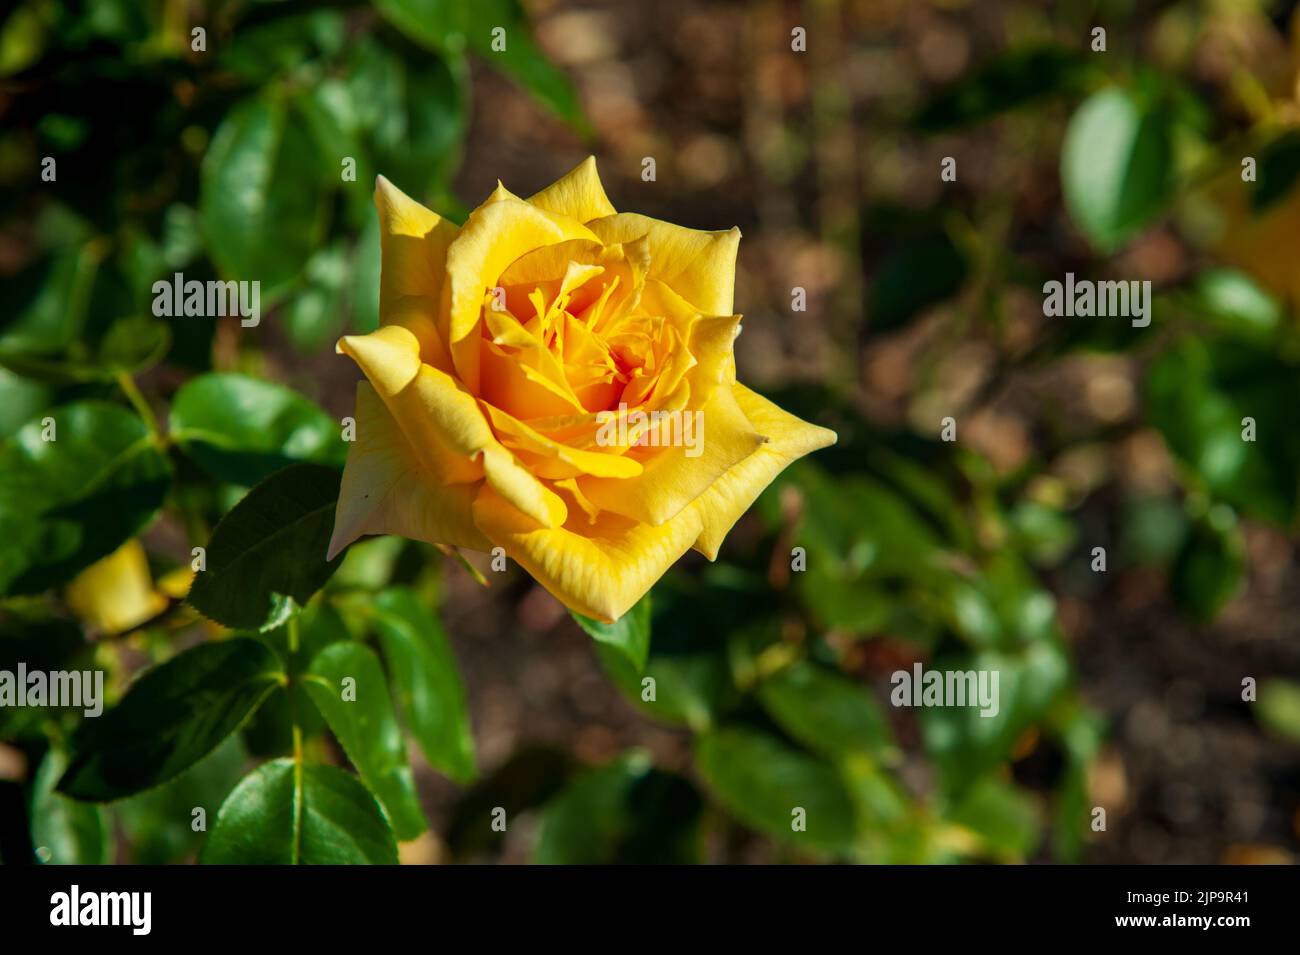 Beautiful yellow roses blossom in the garden on a sunny day Stock Photo